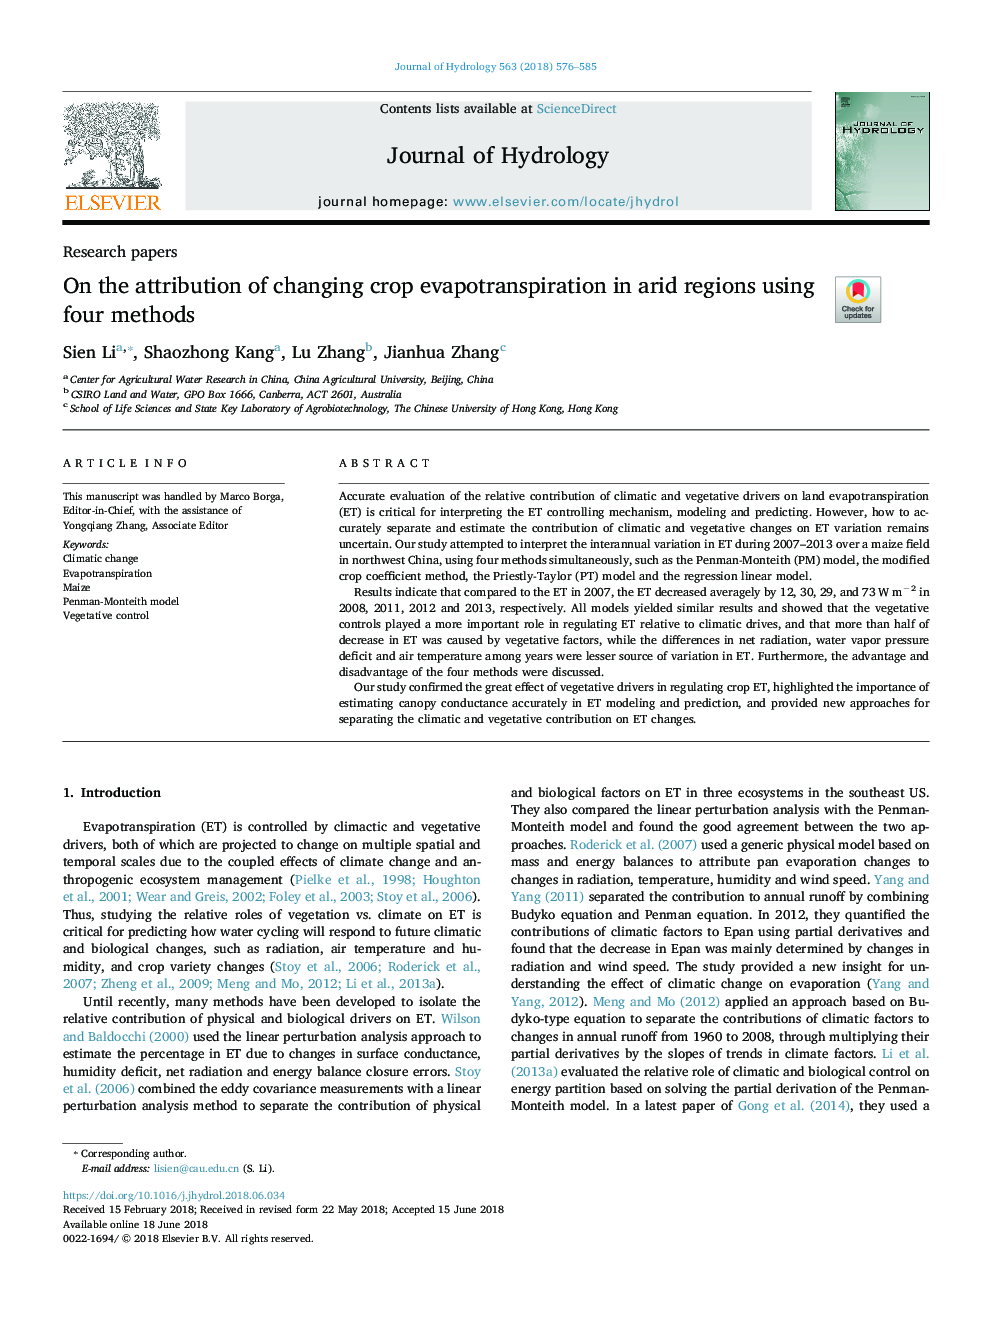 On the attribution of changing crop evapotranspiration in arid regions using four methods